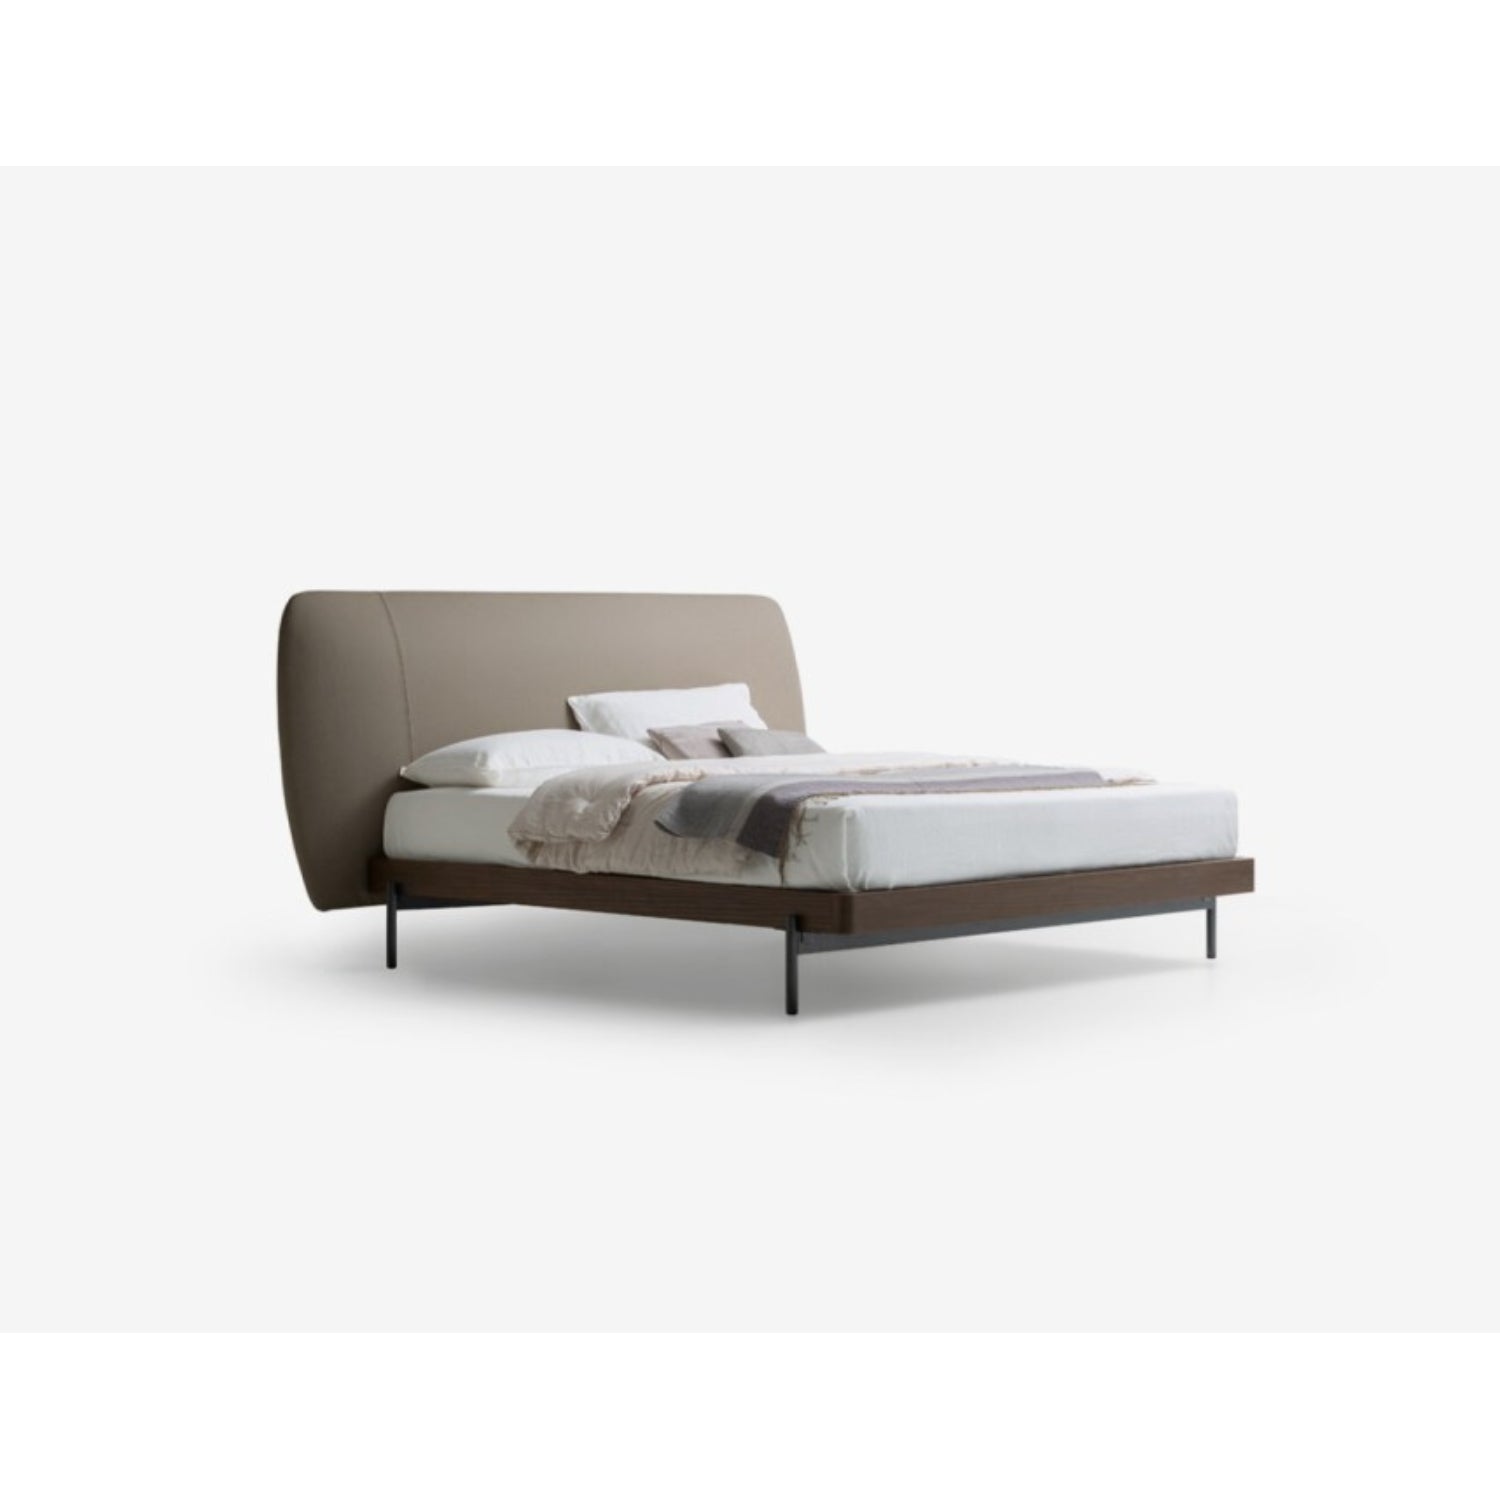 Bali upholstered Bed by Santa Lucia